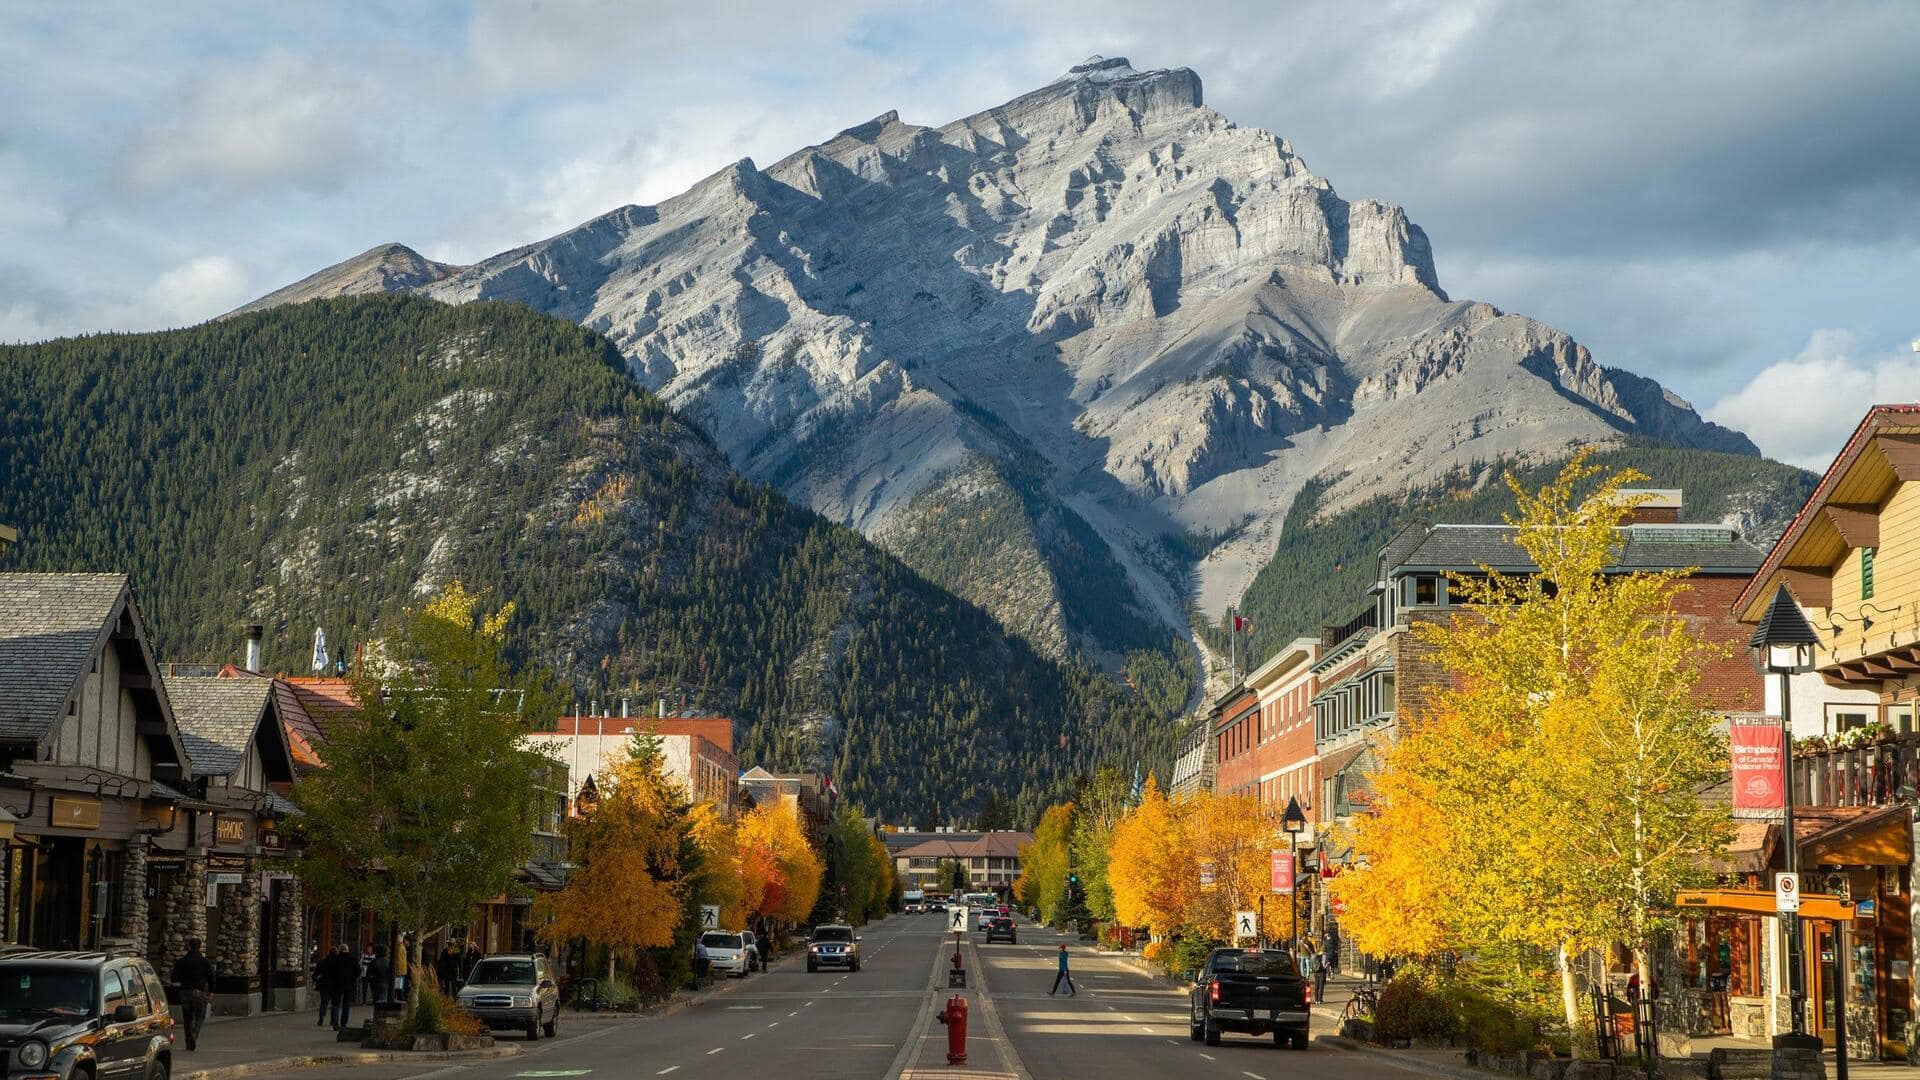 Going to Banff with family? Take them to these places